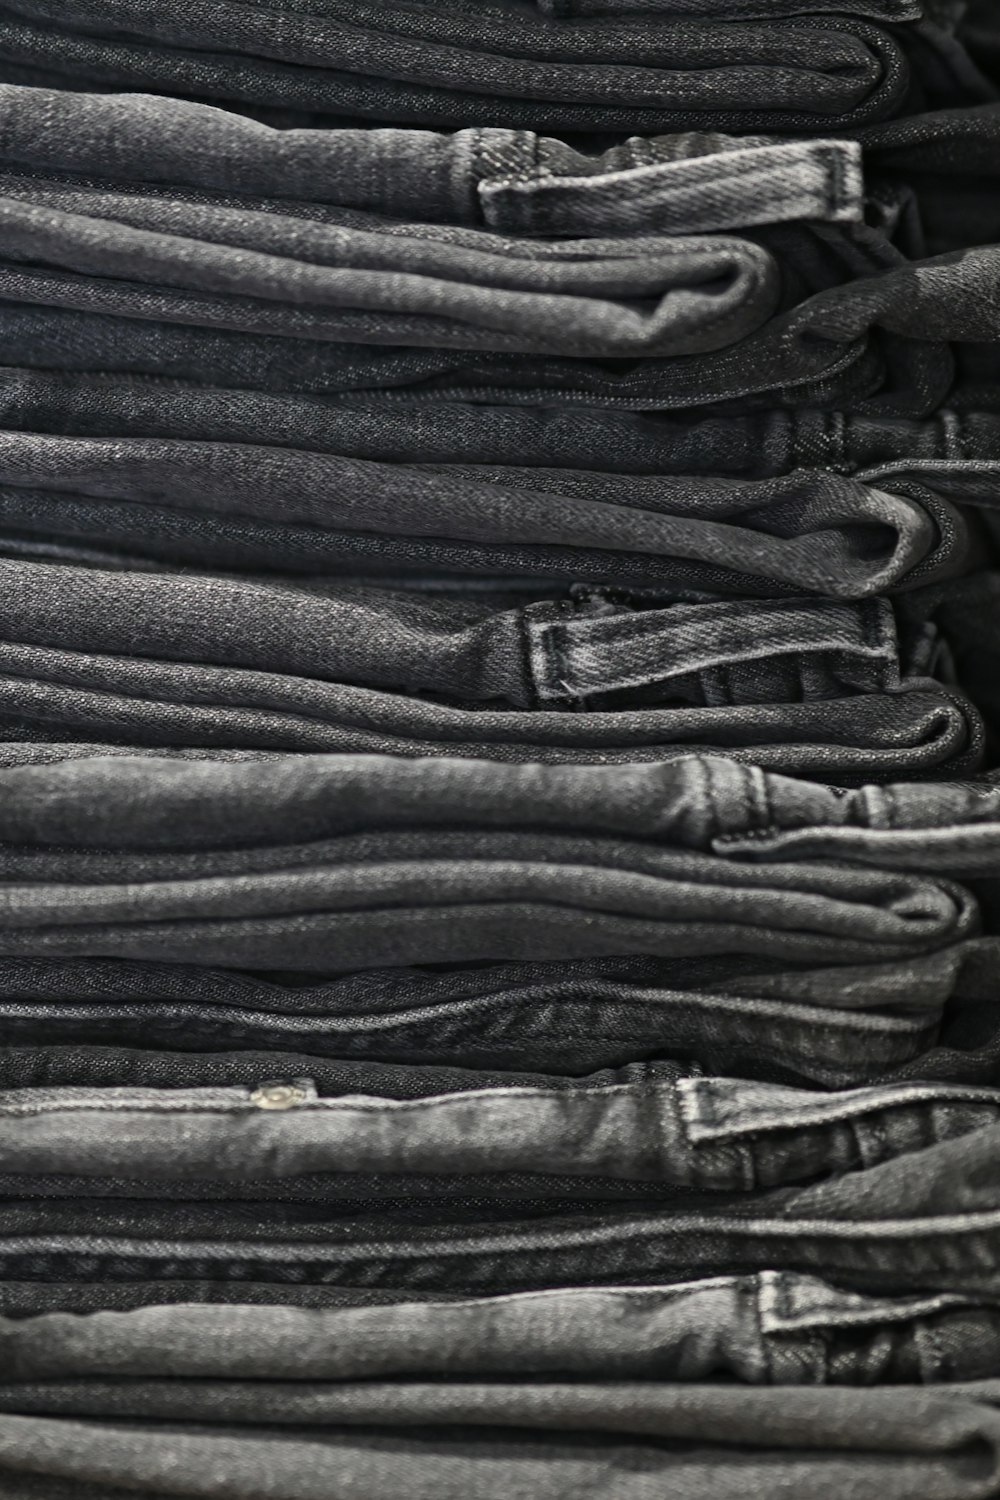 a pile of black jeans stacked on top of each other